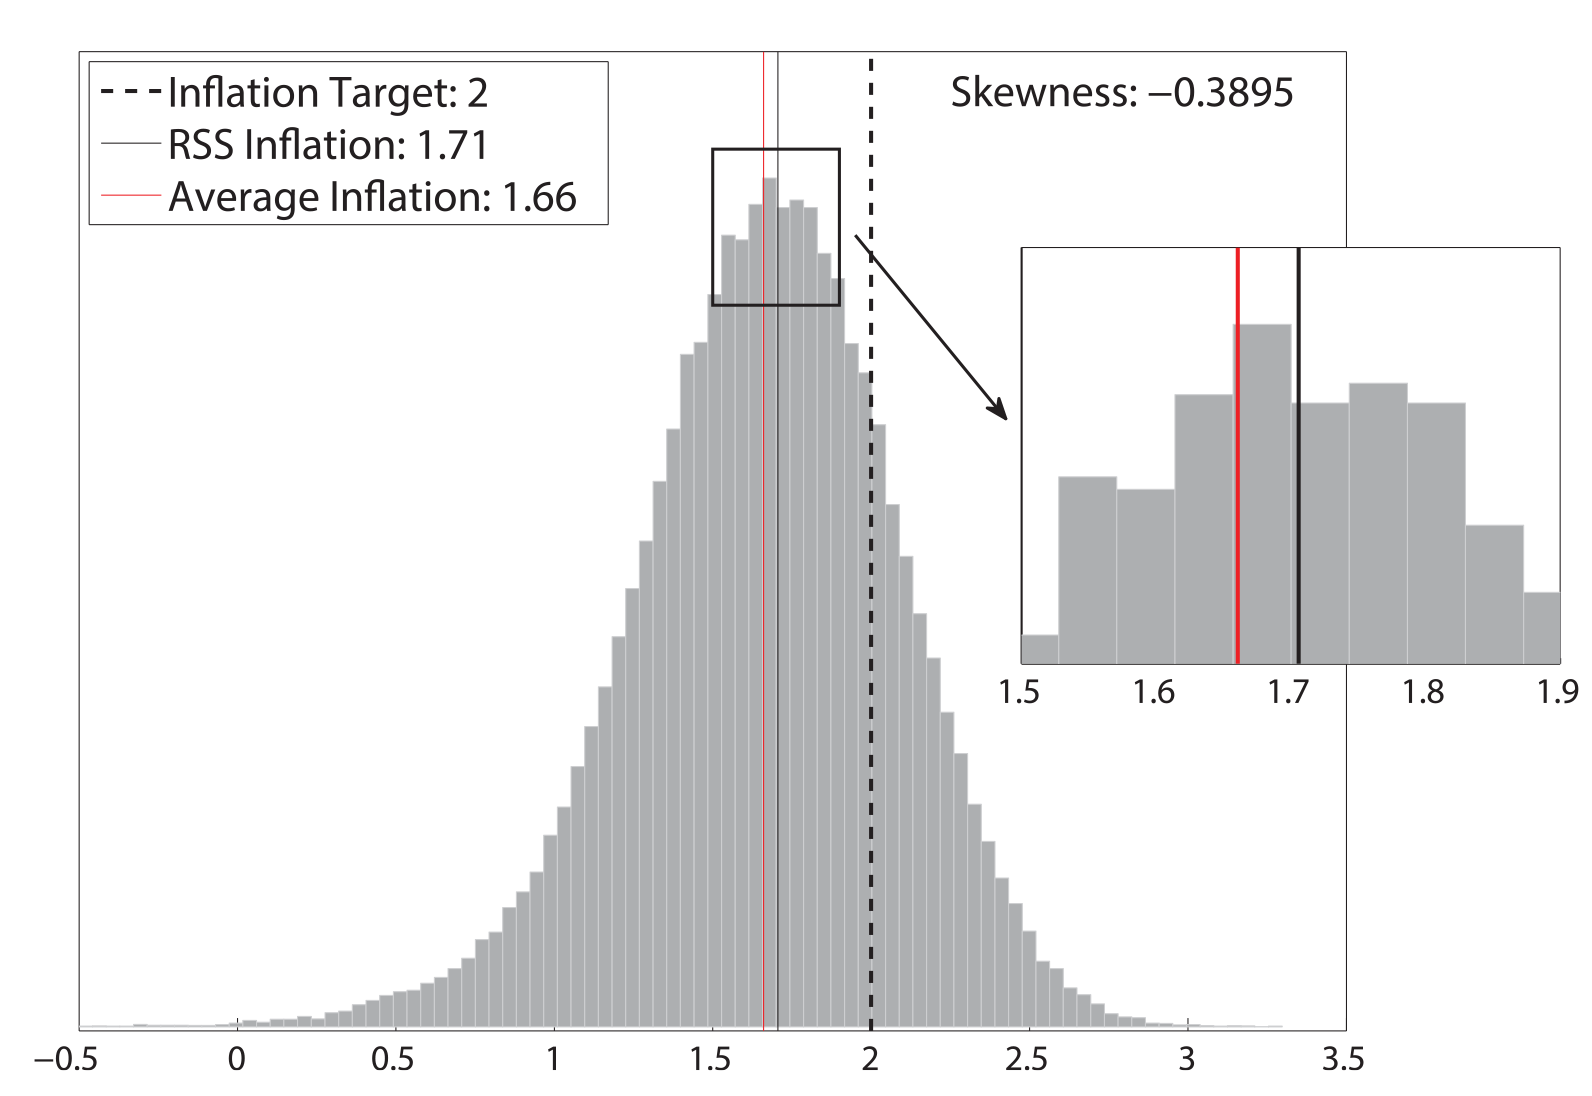 Figure 1: Unconditional Distribution of Inflation. See accessible link for data.